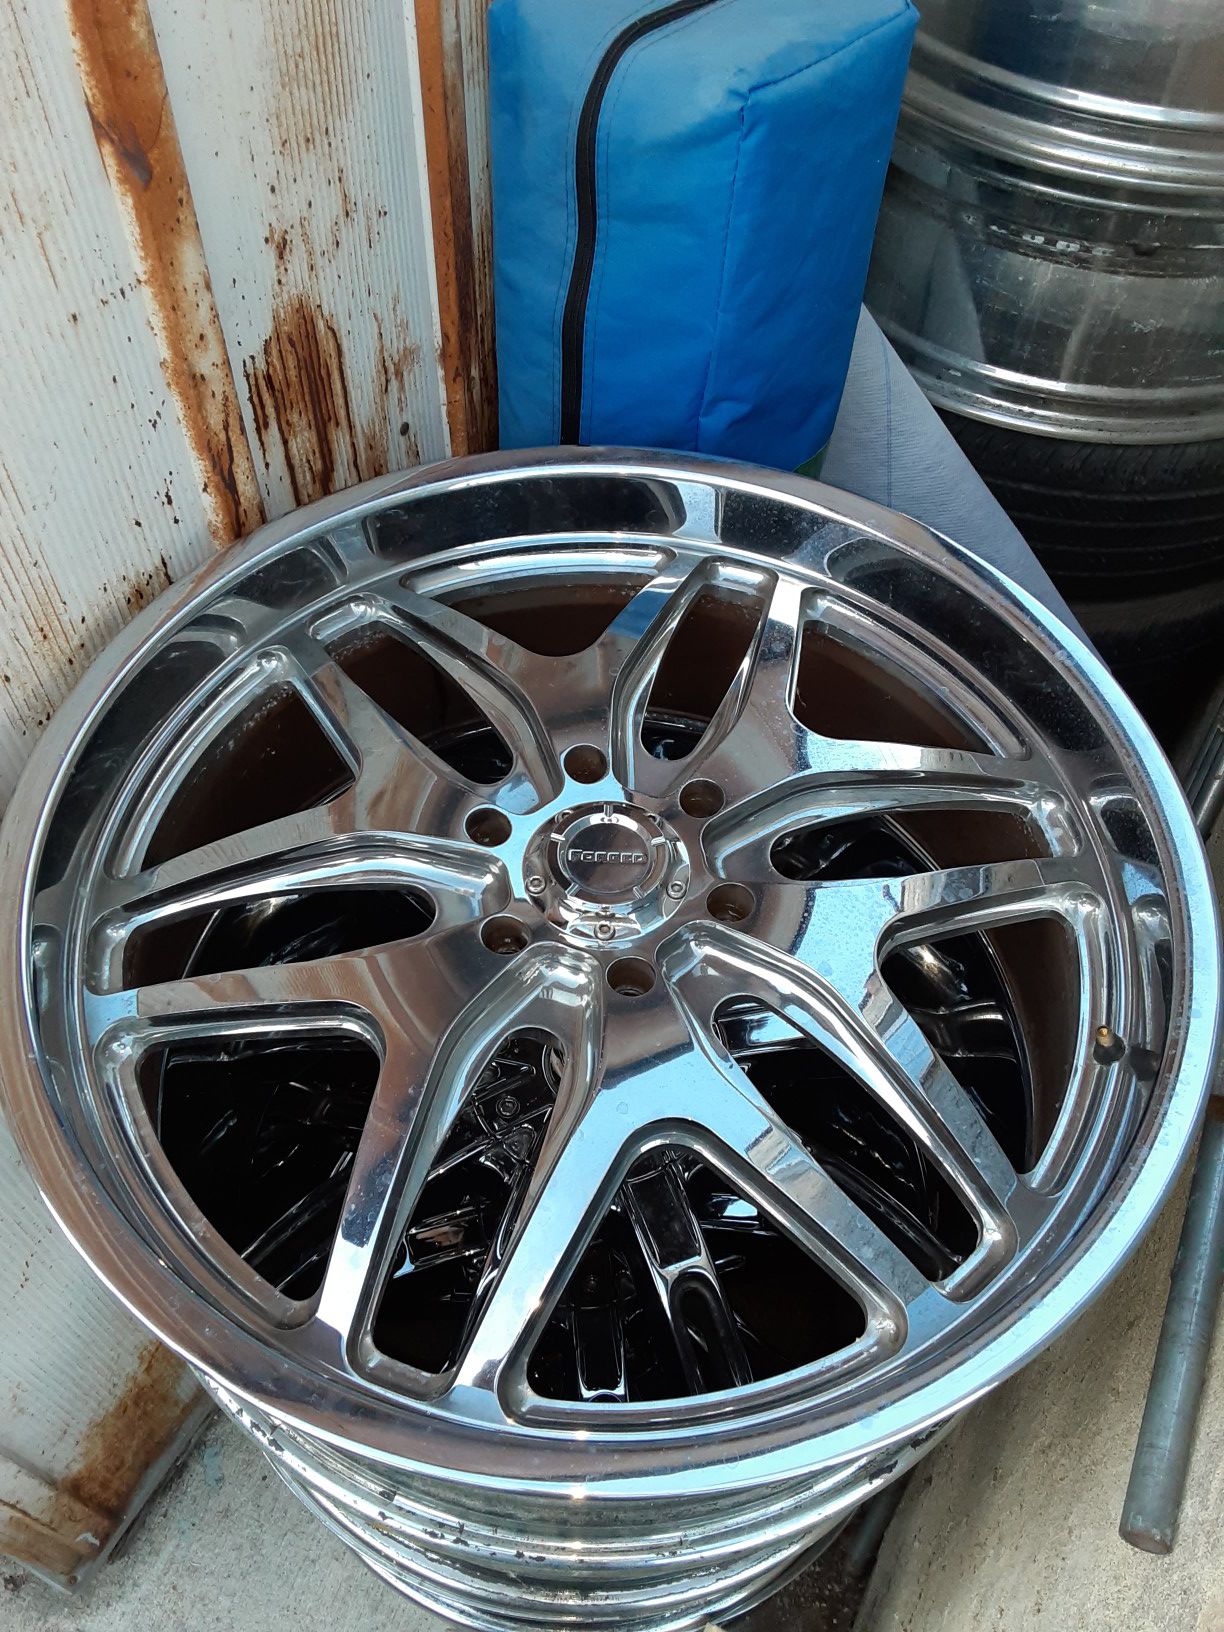 Rims 22"para ford 6 hollos son solo 3 only 3. I only have three 3 rims, with 6 holes.